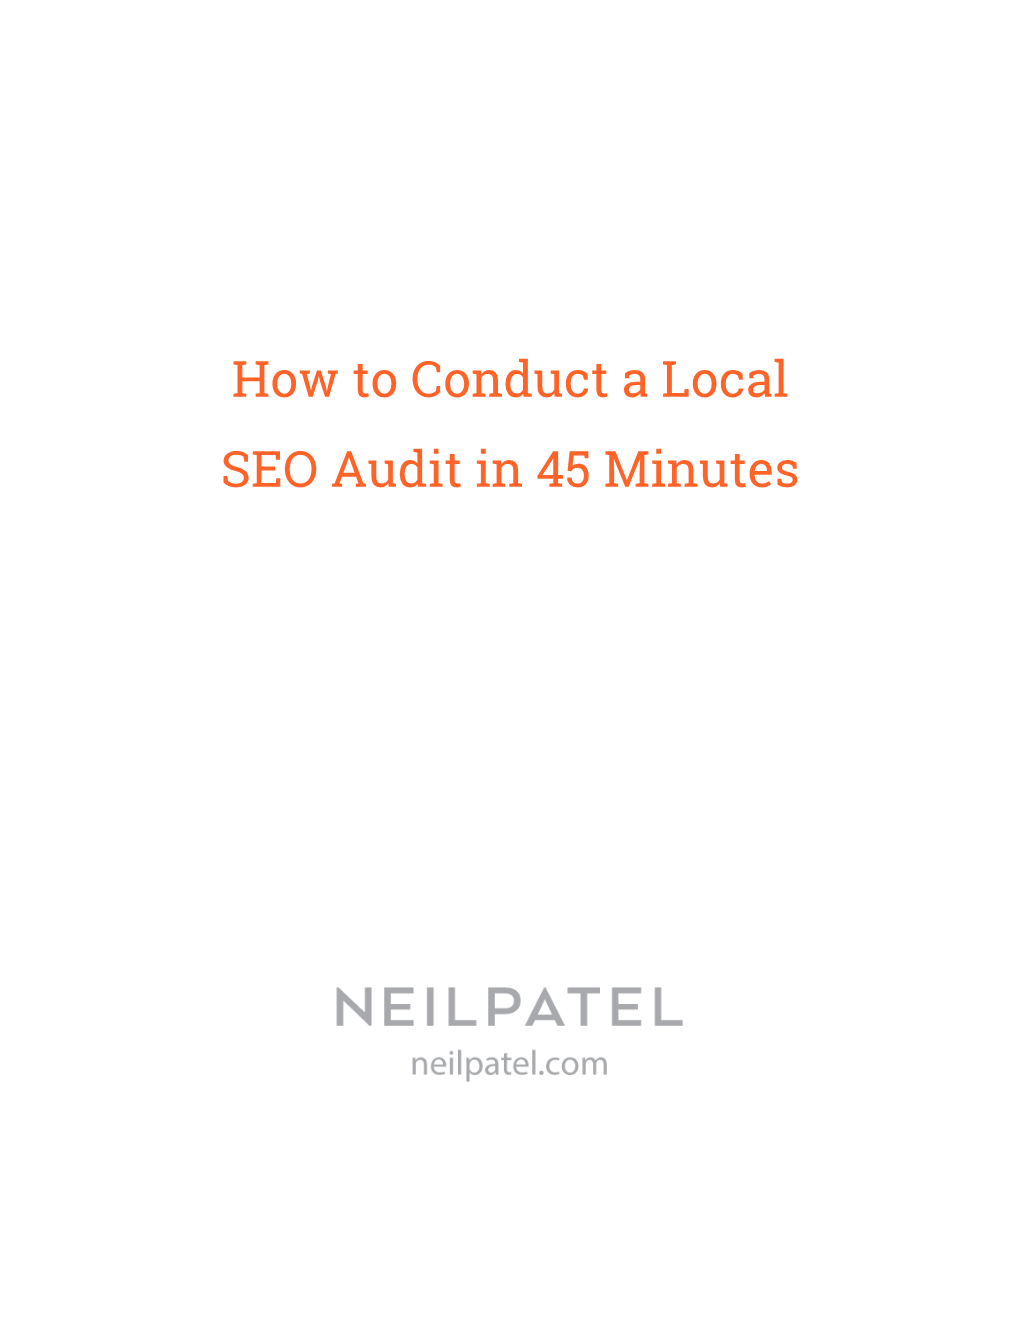 How to Conduct a Local SEO Audit in 45 Minutes